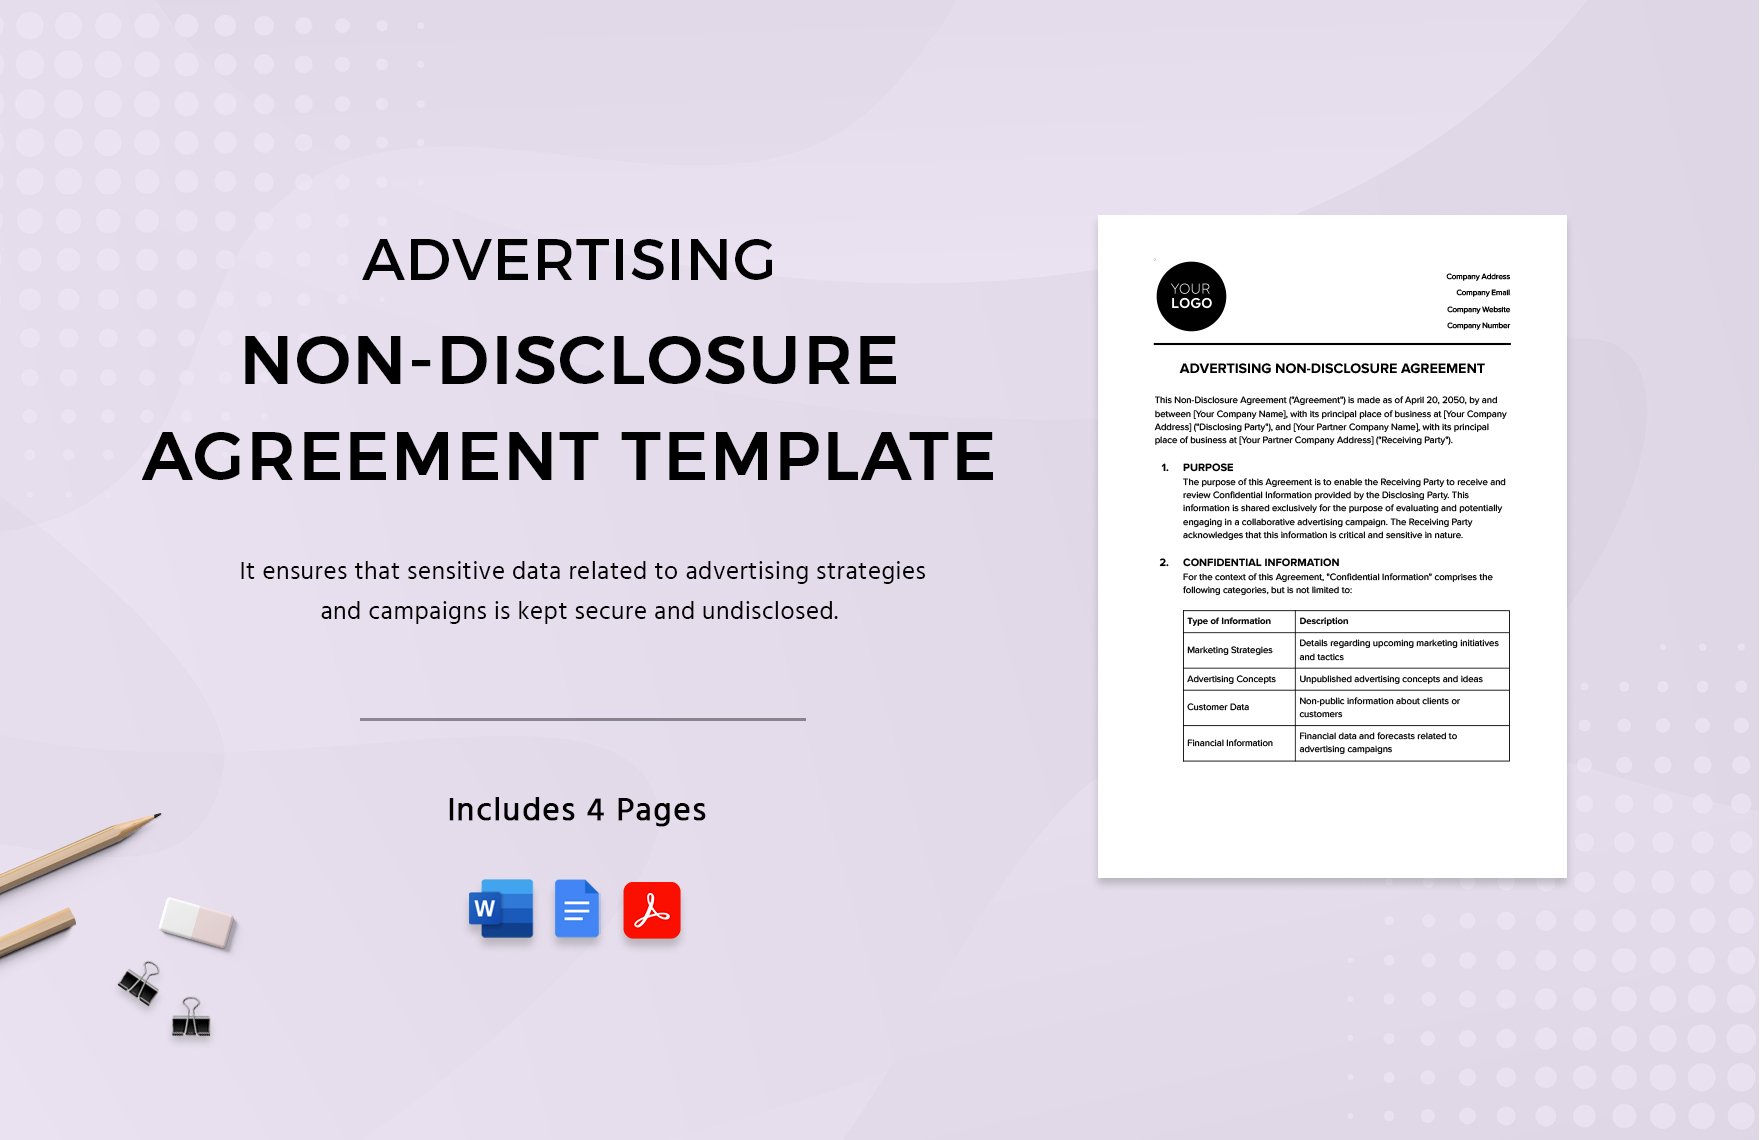 Advertising Non-Disclosure Agreement Template